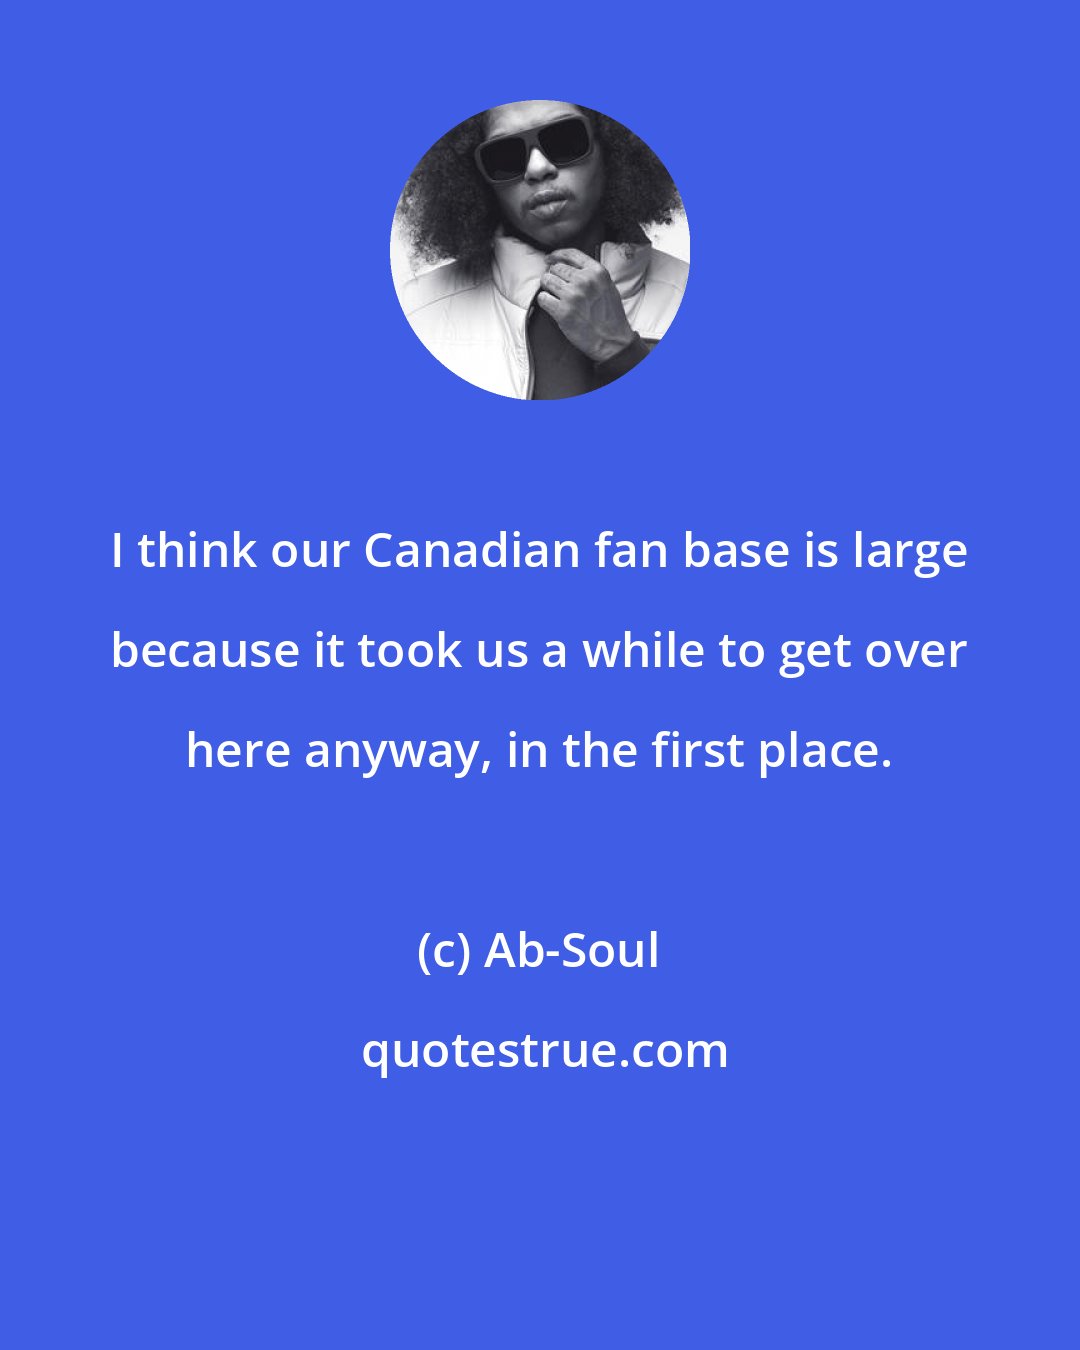 Ab-Soul: I think our Canadian fan base is large because it took us a while to get over here anyway, in the first place.